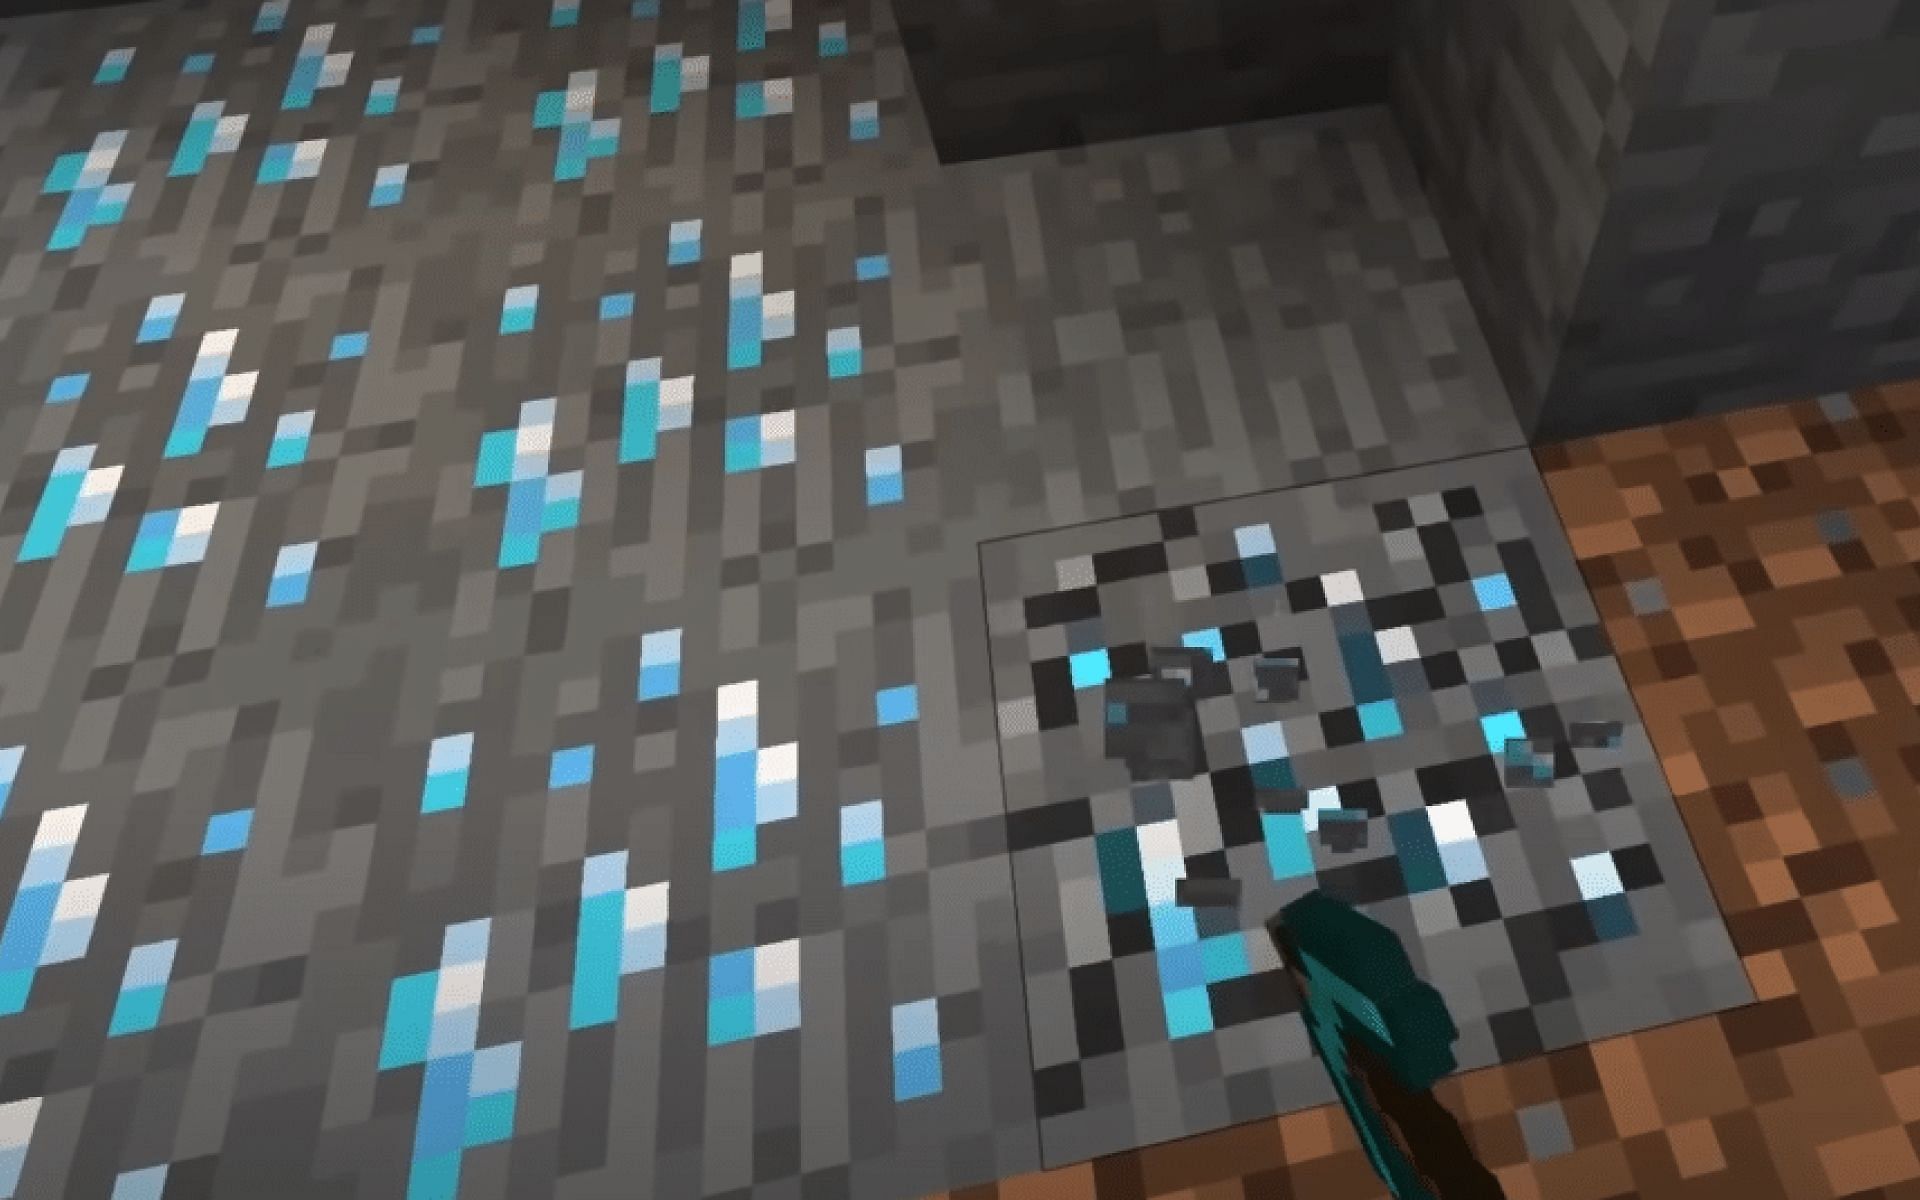 Diamonds can be difficult for Minecraft players to find (Image via Minecraft)